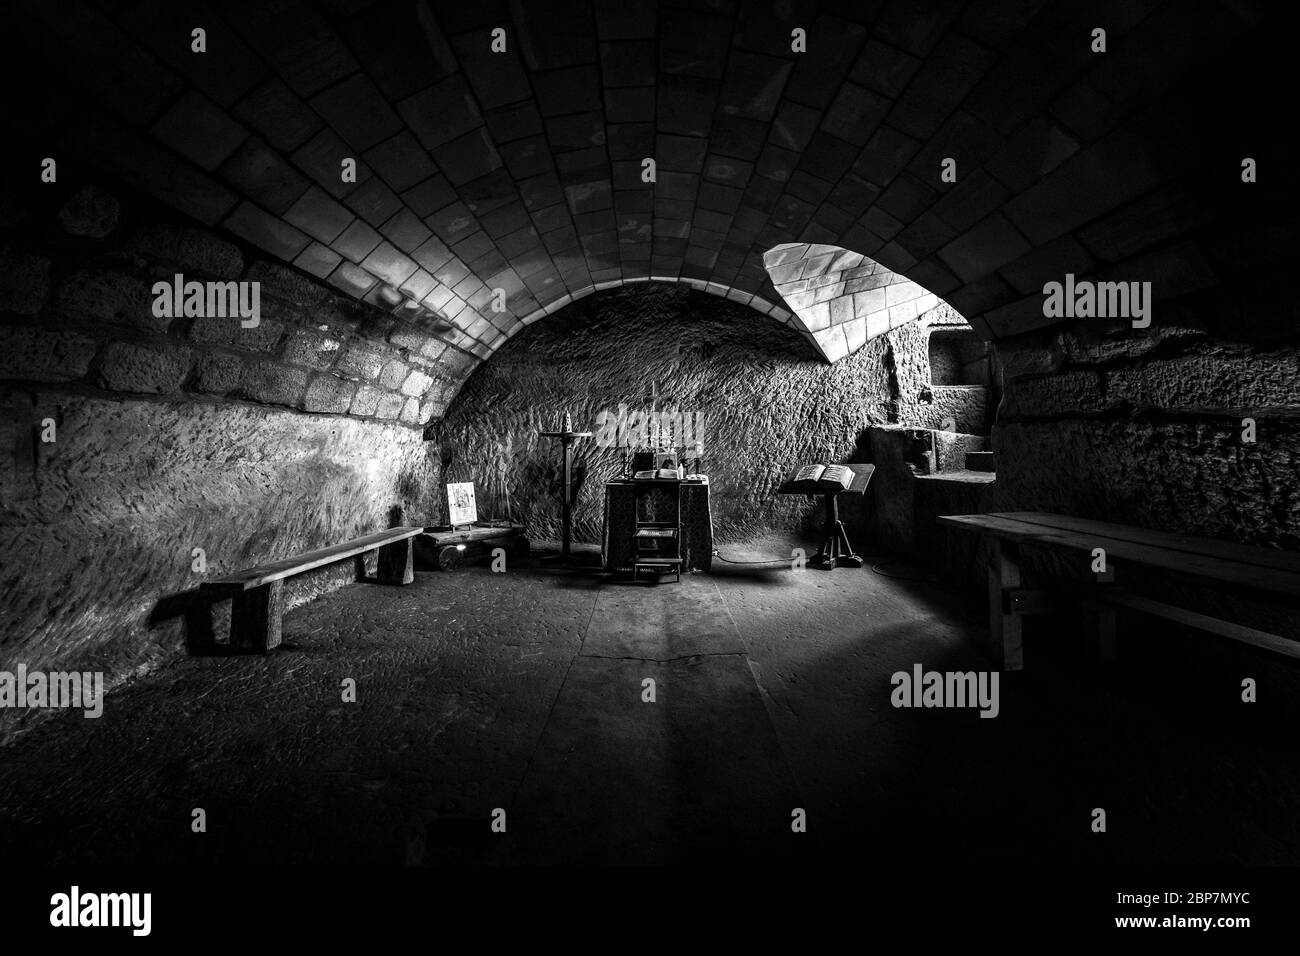 OYBIN, GERMANY - OCTOBER 10, 2019: The monastery cell in the ruins of Burg Oybin, founded as Celestines monastery in 1369 in the Zittau Mountains on the border of Germany (Saxony) with the Czech Republic. Black and white. Stock Photo